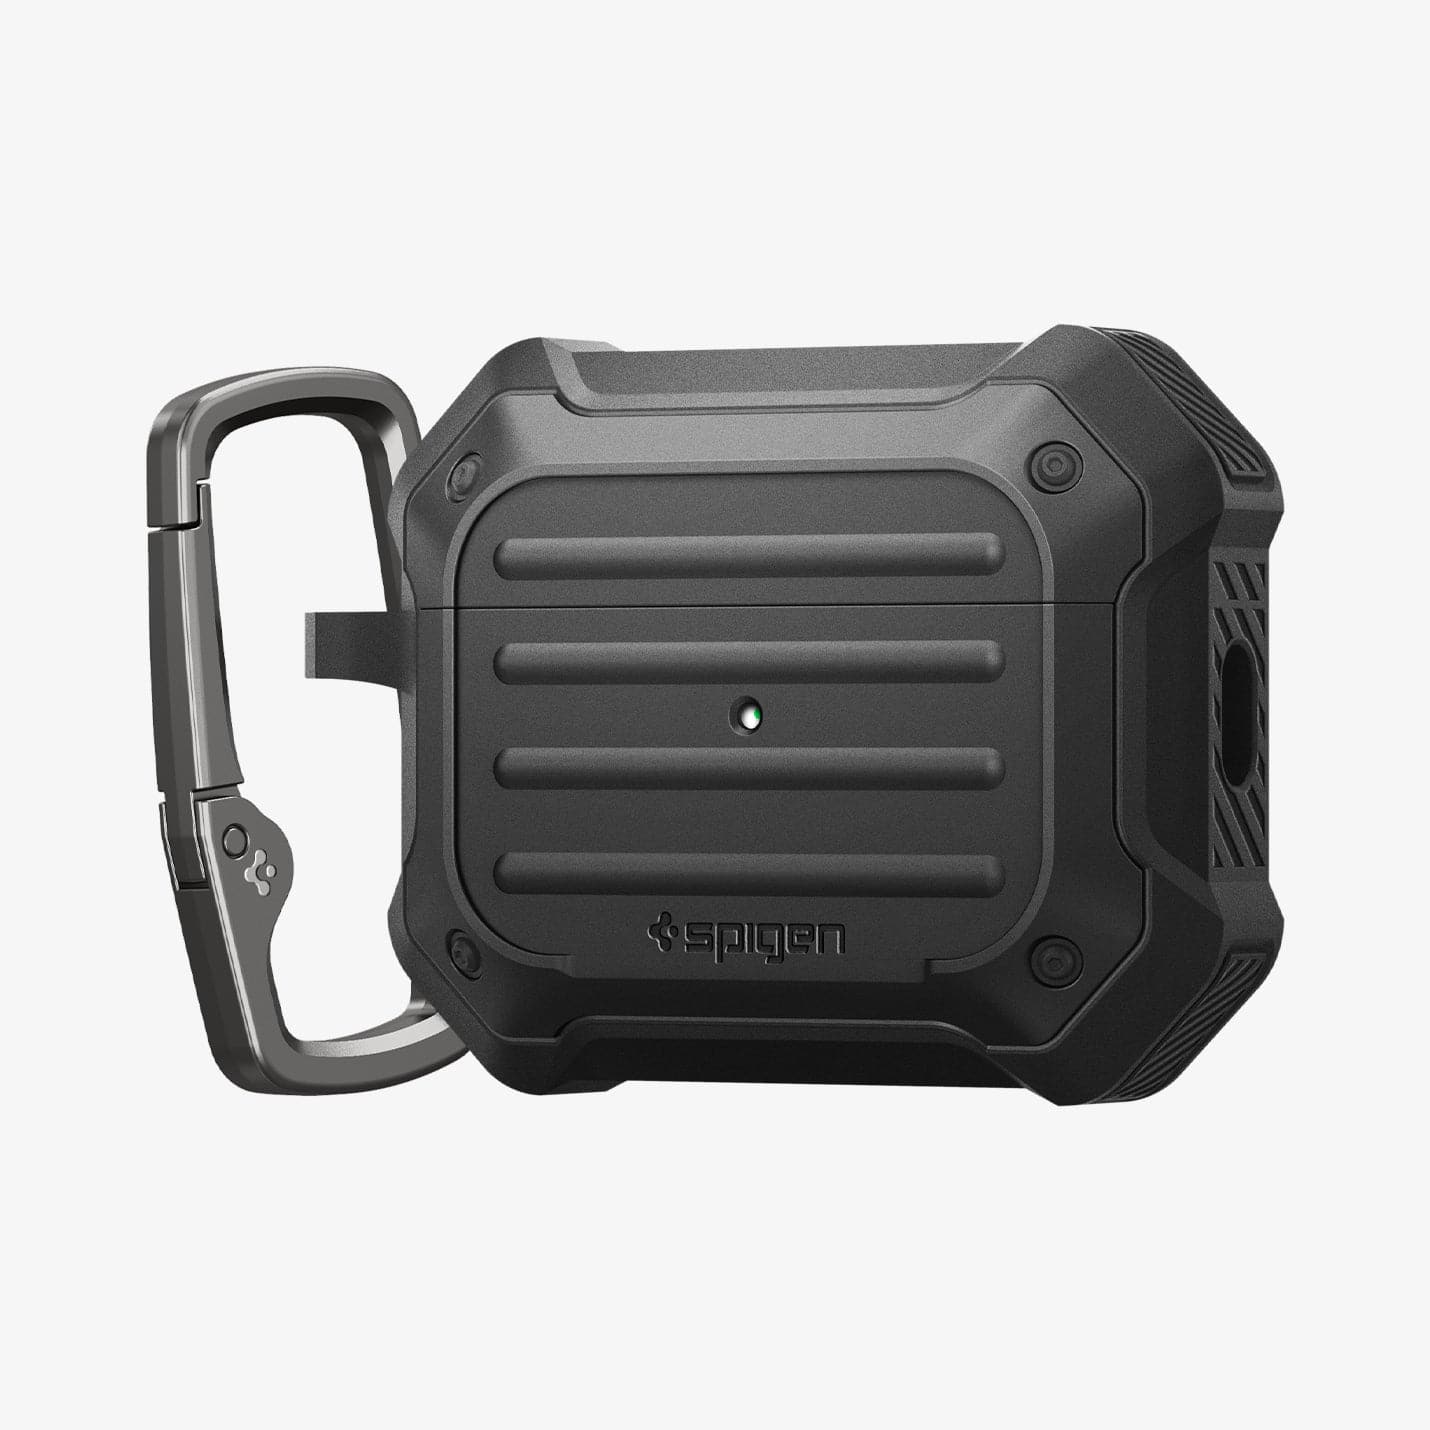 ACS05480 - Apple AirPods Pro 2 Case Tough Armor in black showing the front, side and carabiner